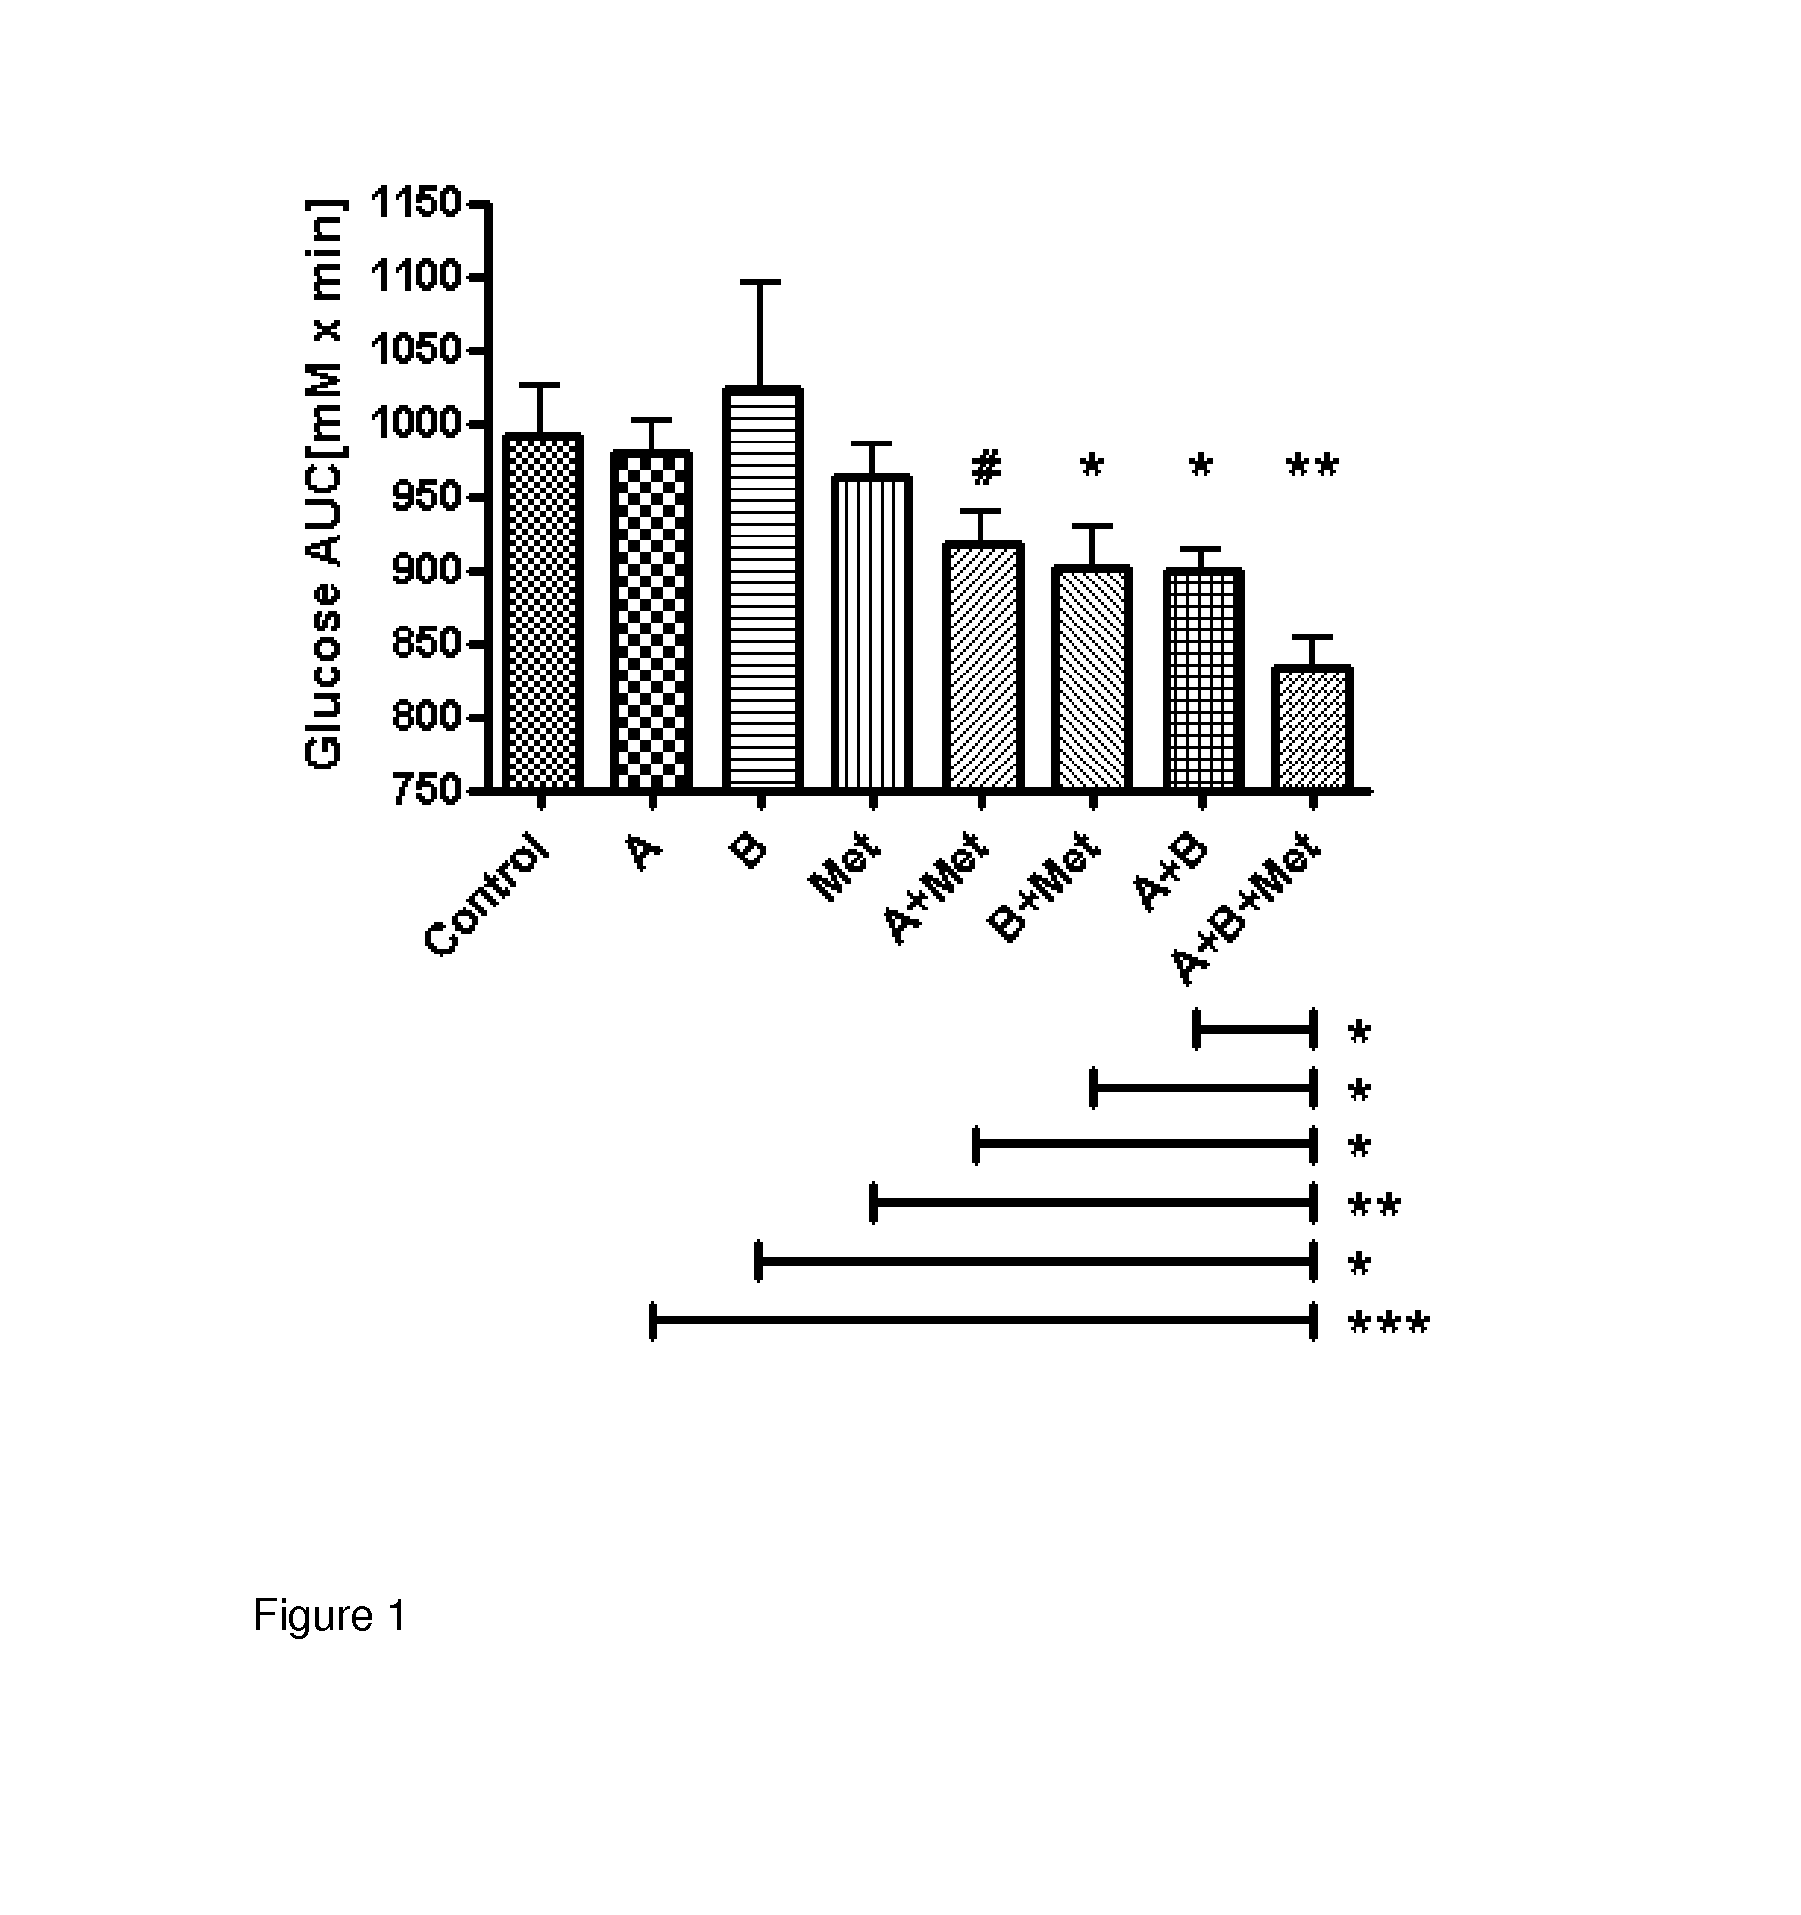 Pharmaceutical composition, methods for treating and uses thereof